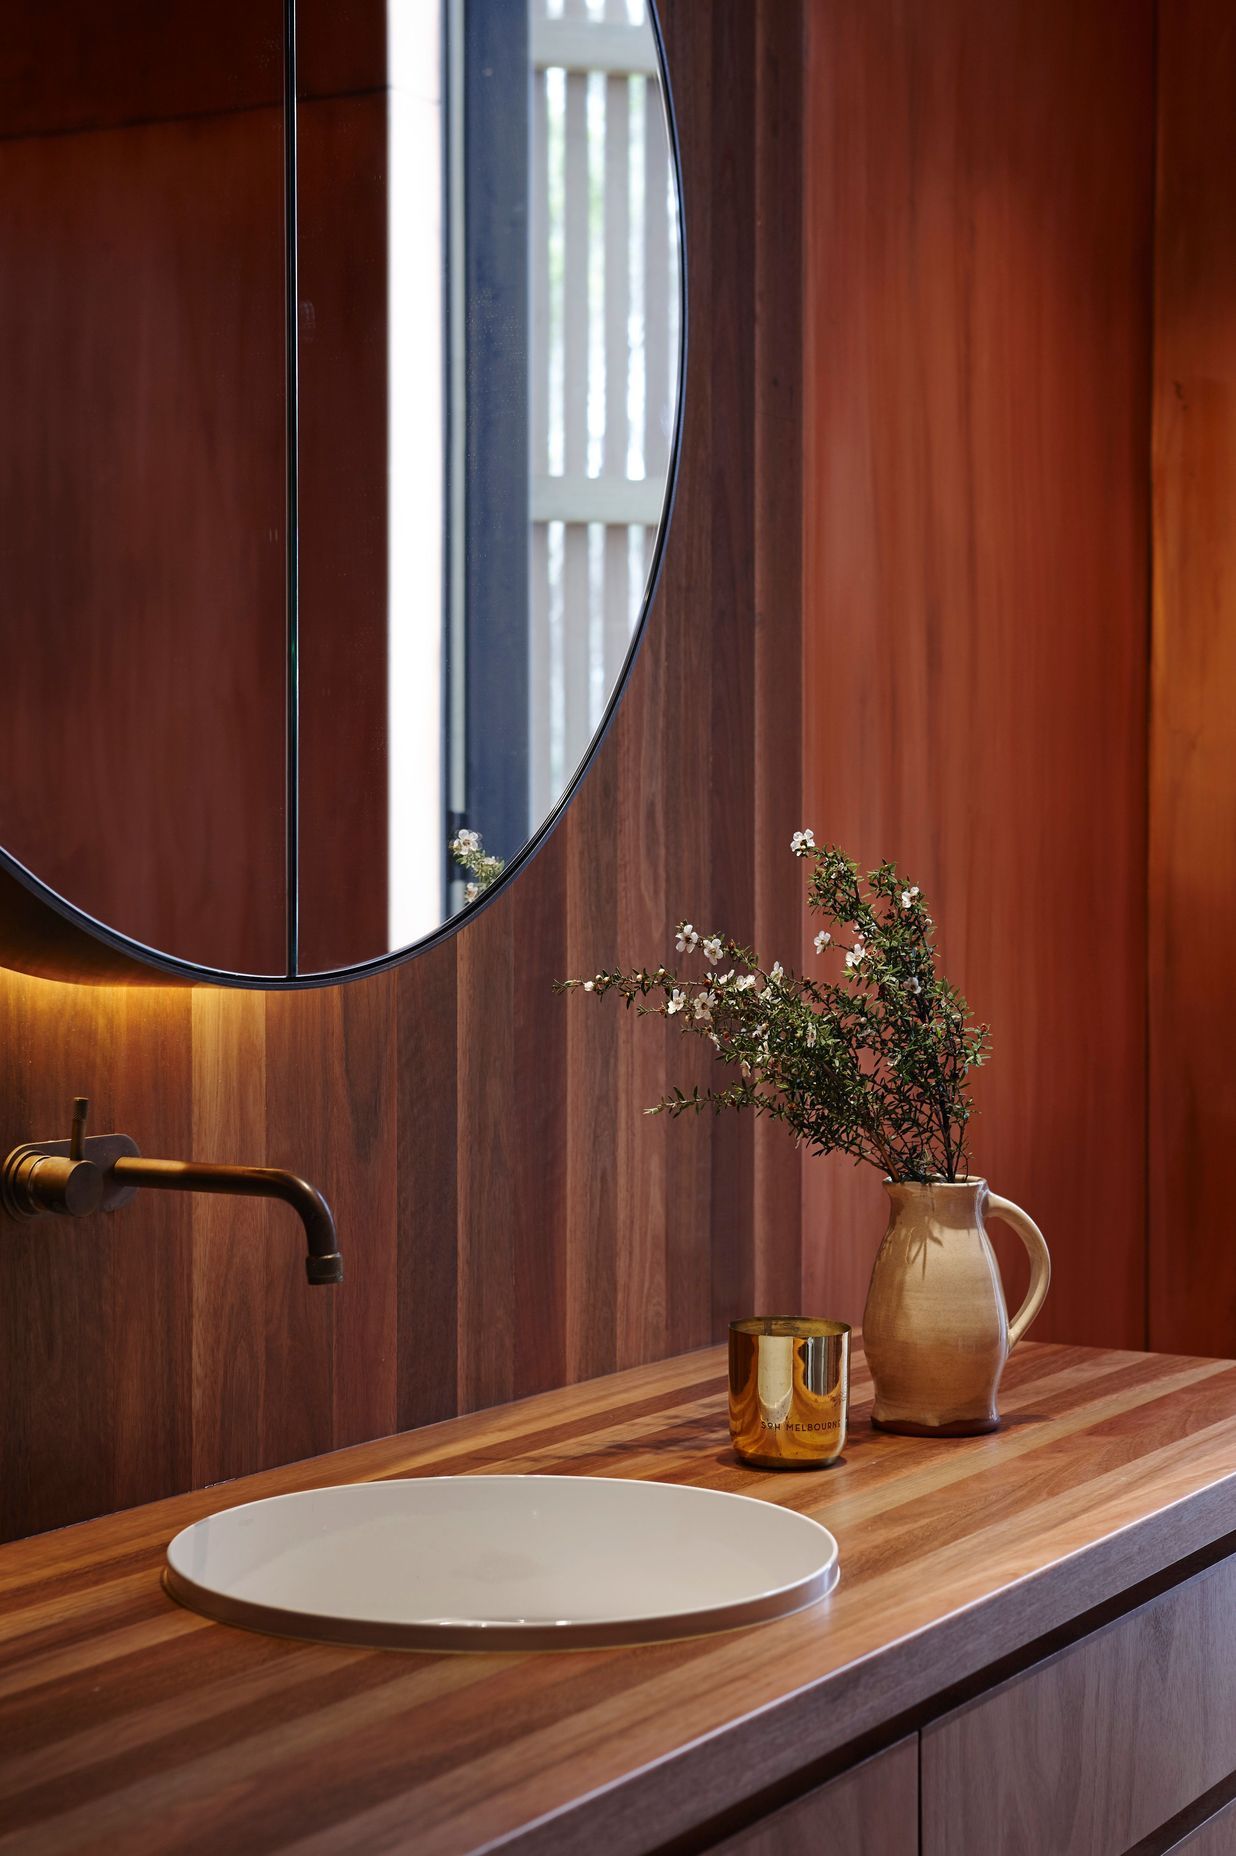 Copper tapware and bespoke timber cabinetry add yet more warmth into the bathrooms.